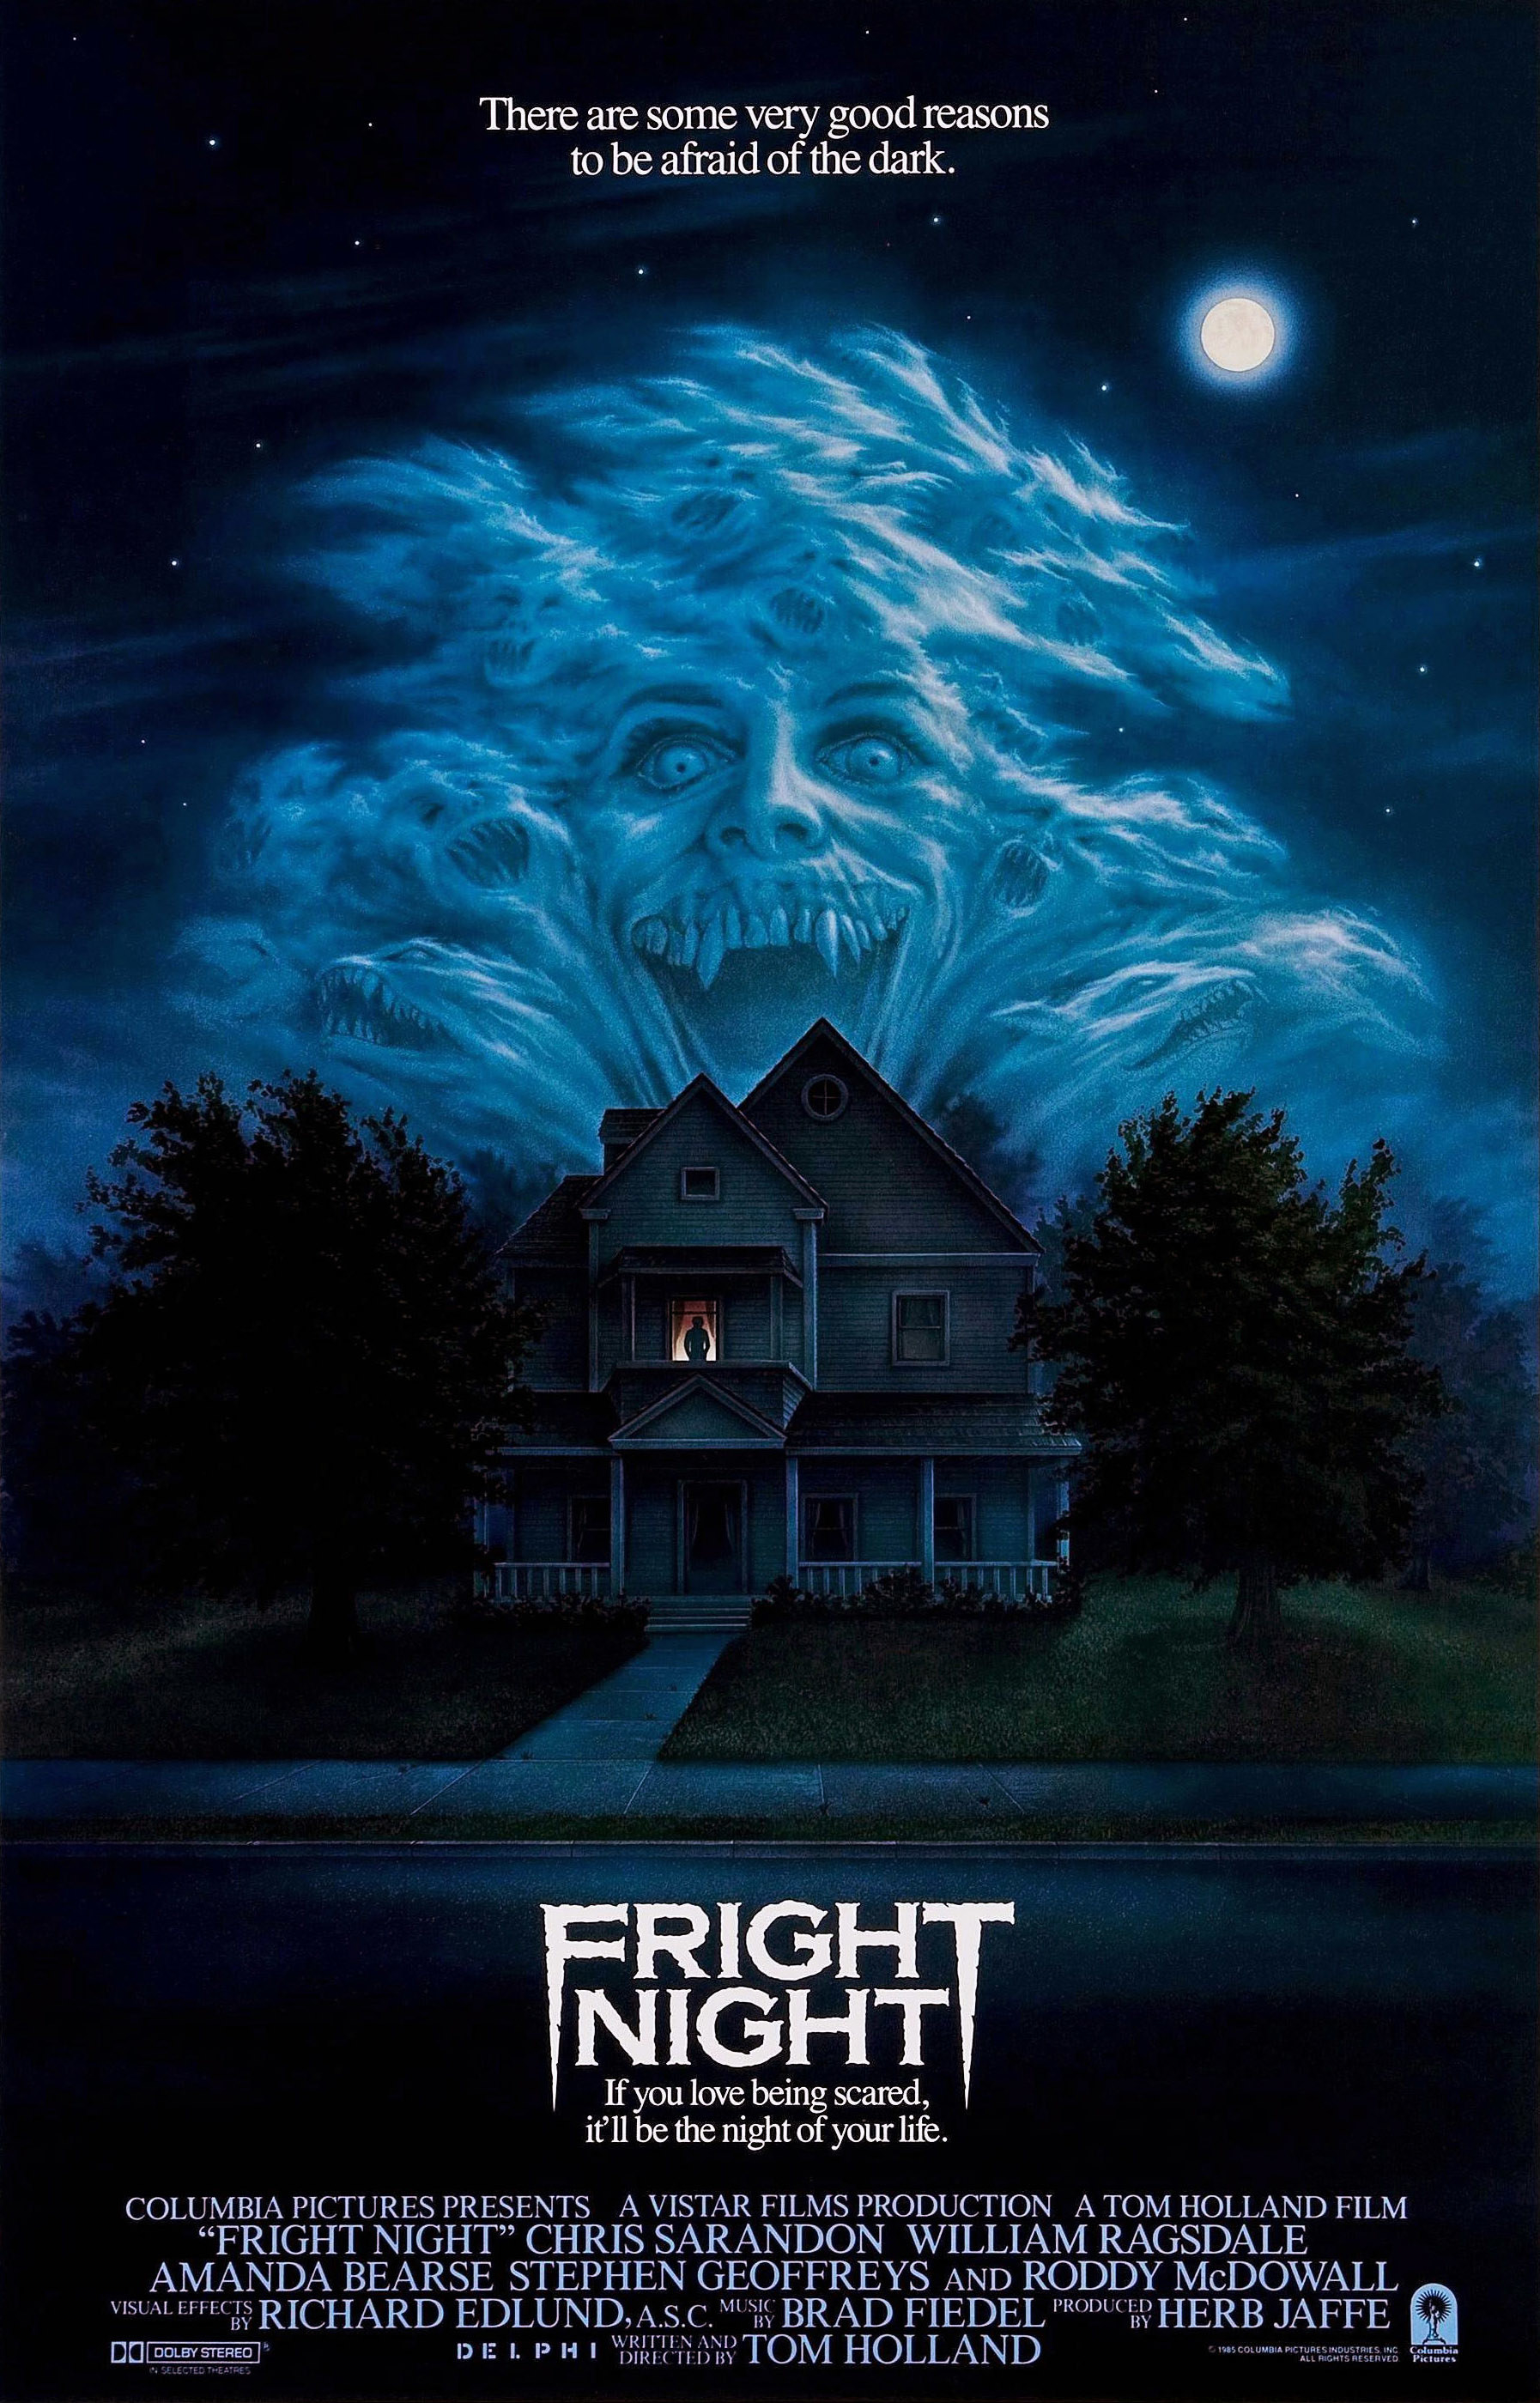 The official &quot;Fright Night&quot; poster which features some freaky looking vampire faces in clouds above an otherwise docile suburban home